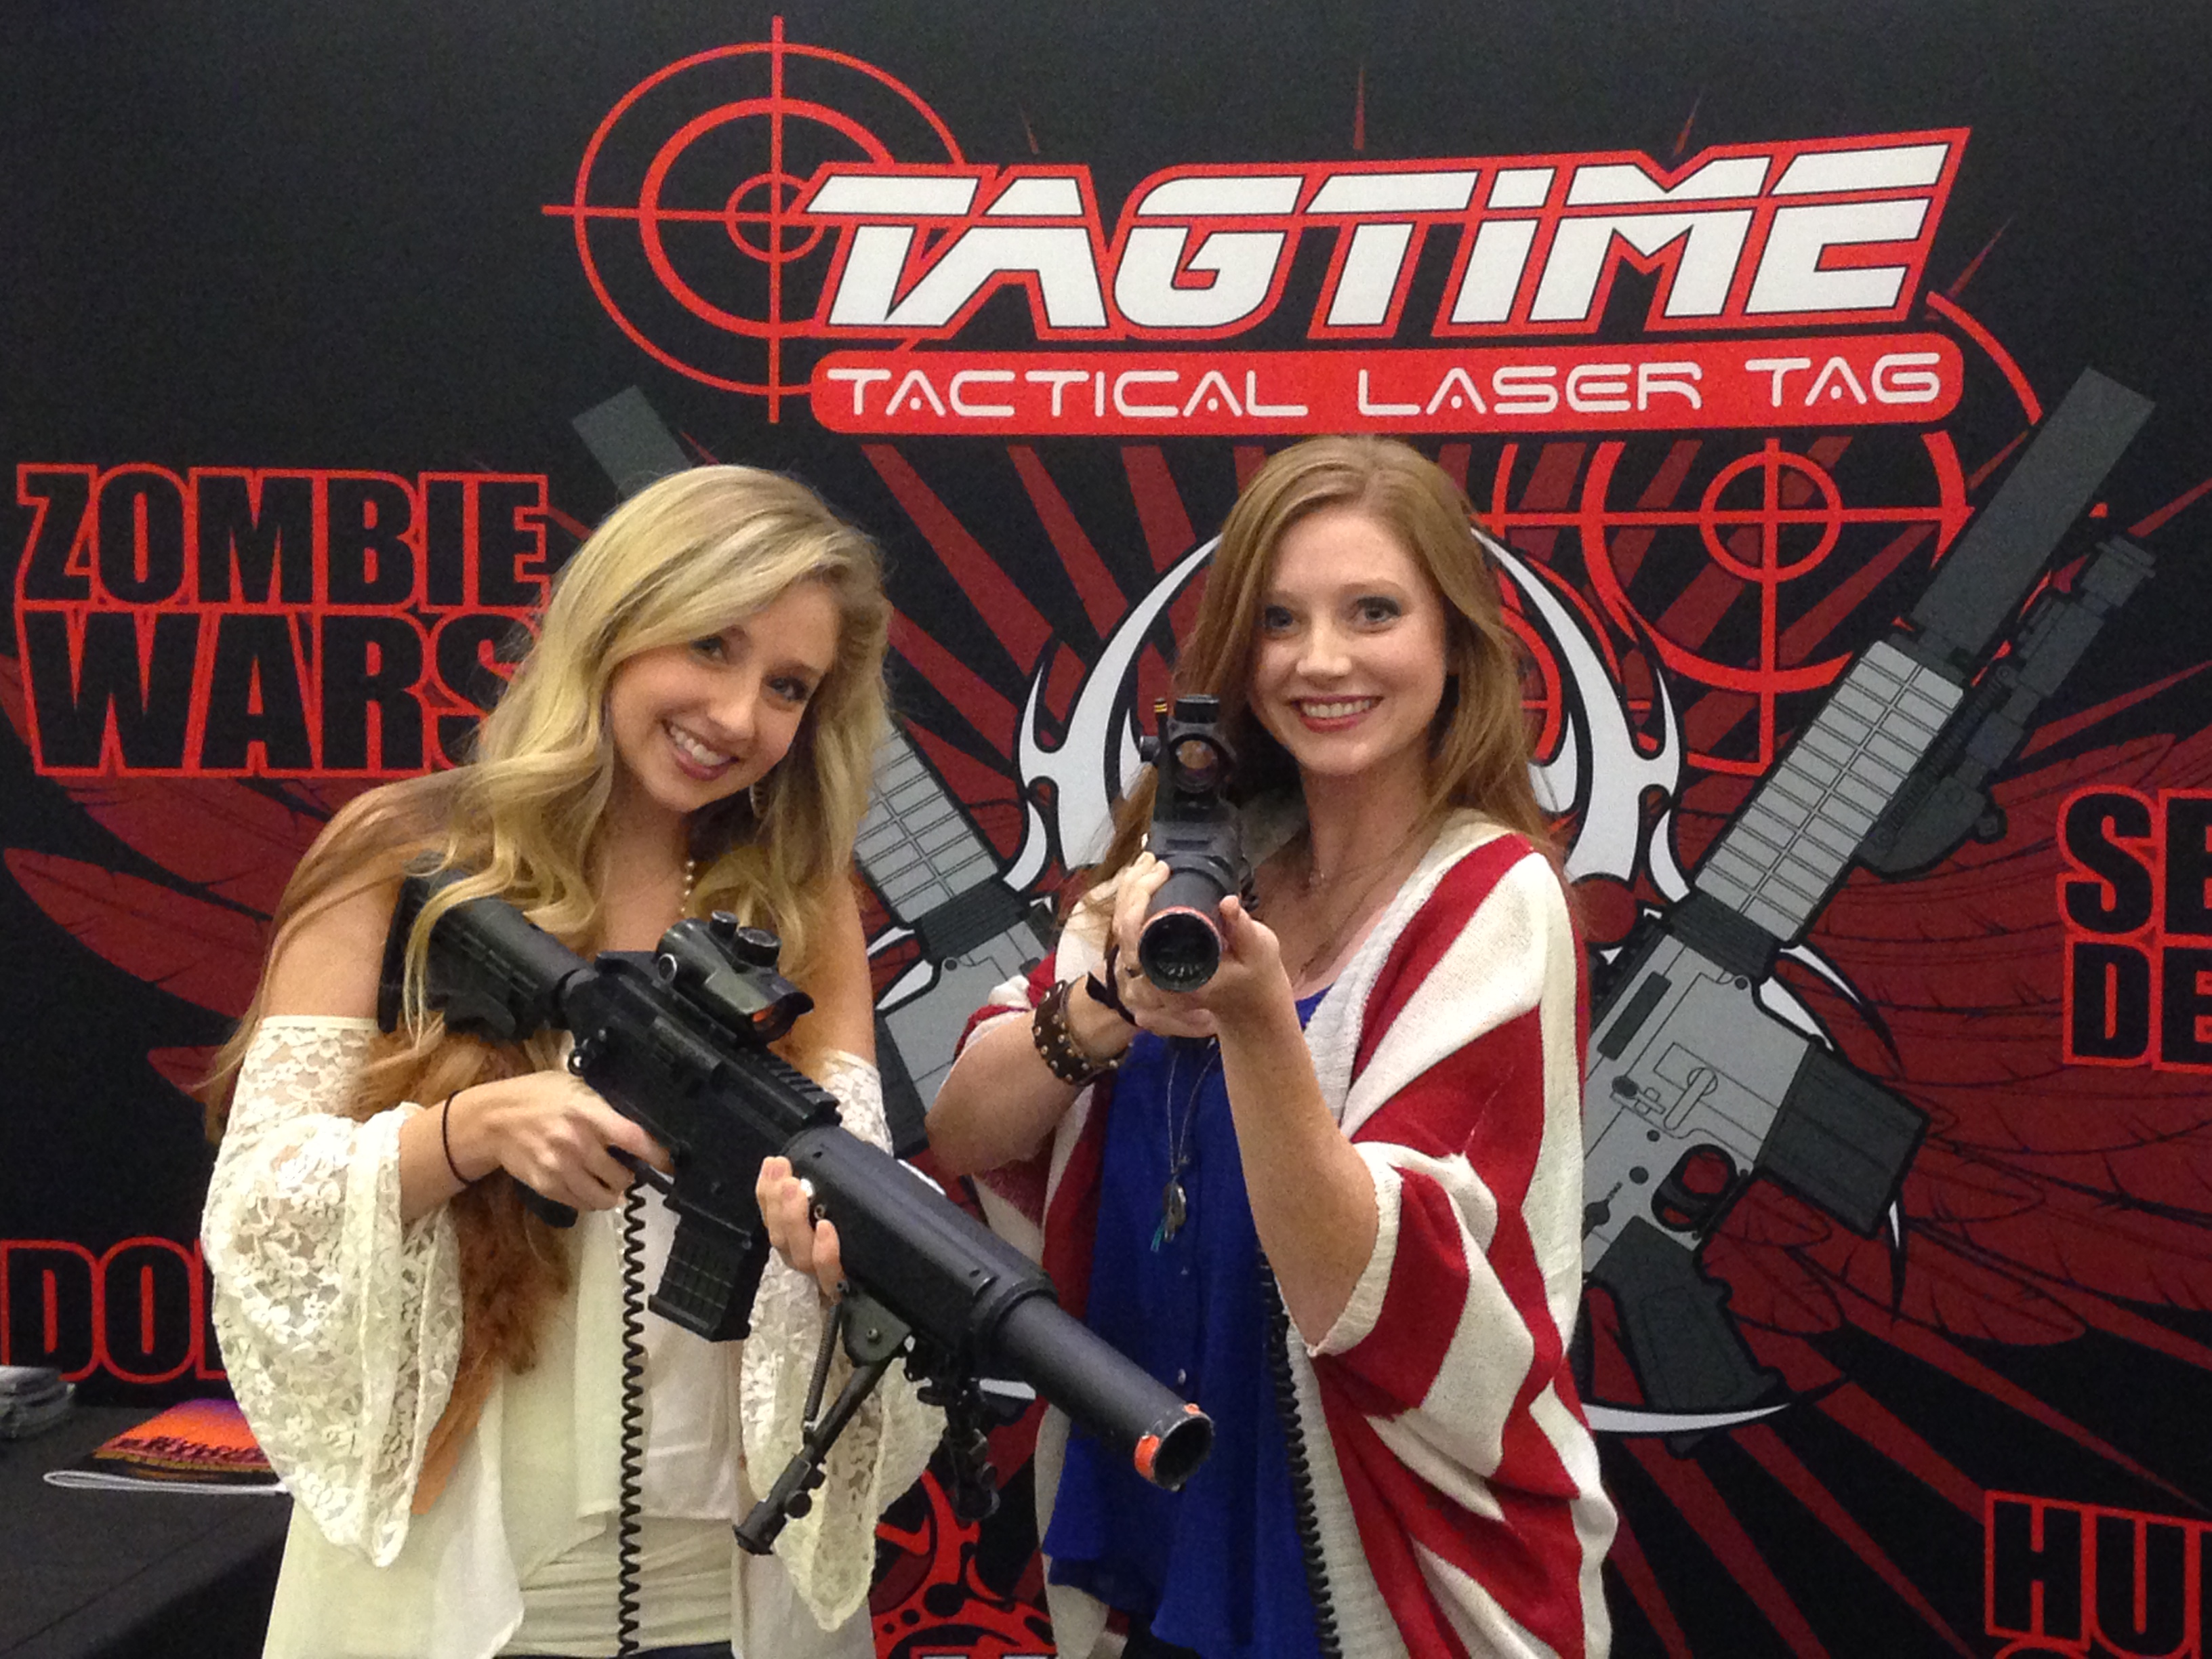 Tagtime Laser Tag Taggers